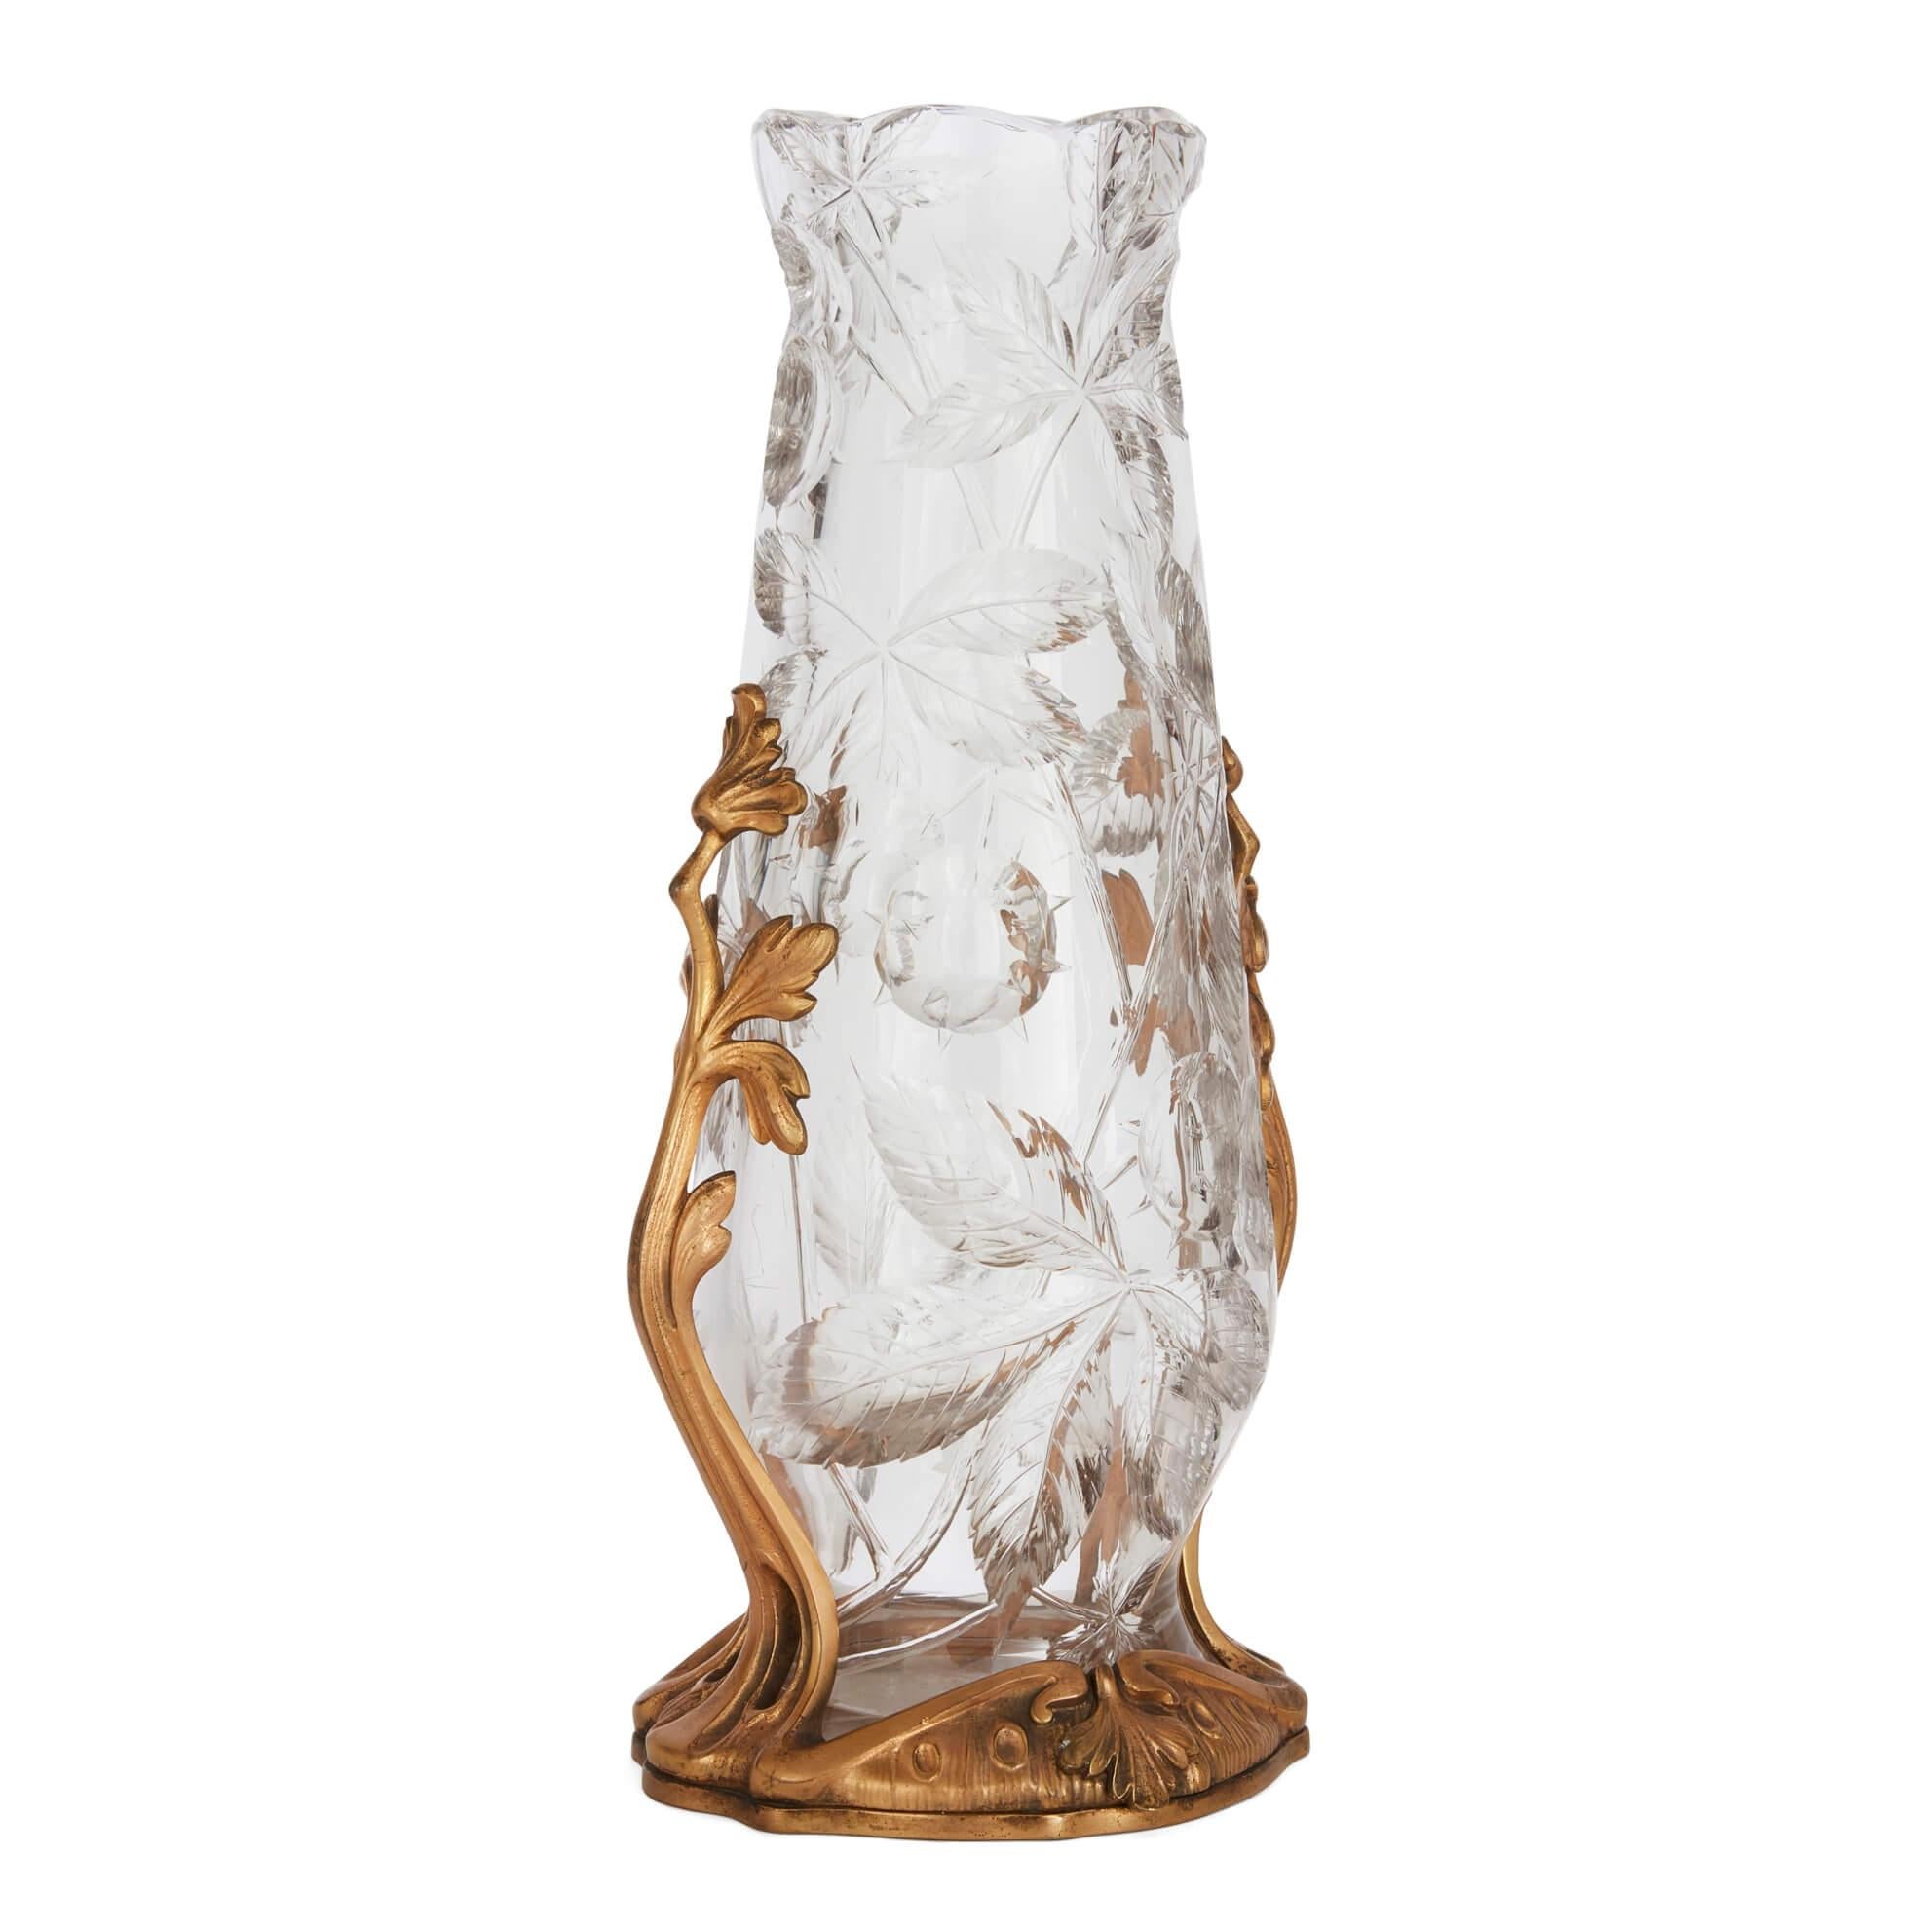 Art Nouveau Baccarat crystal vase with ormolu base
French, c. 1905
Height 32cm, diameter 14cm

This stunning Baccarat glass vase is accompanied by an intriguing ormolu base. The crystal vase has a rounded body, which culminates in a long polylobed